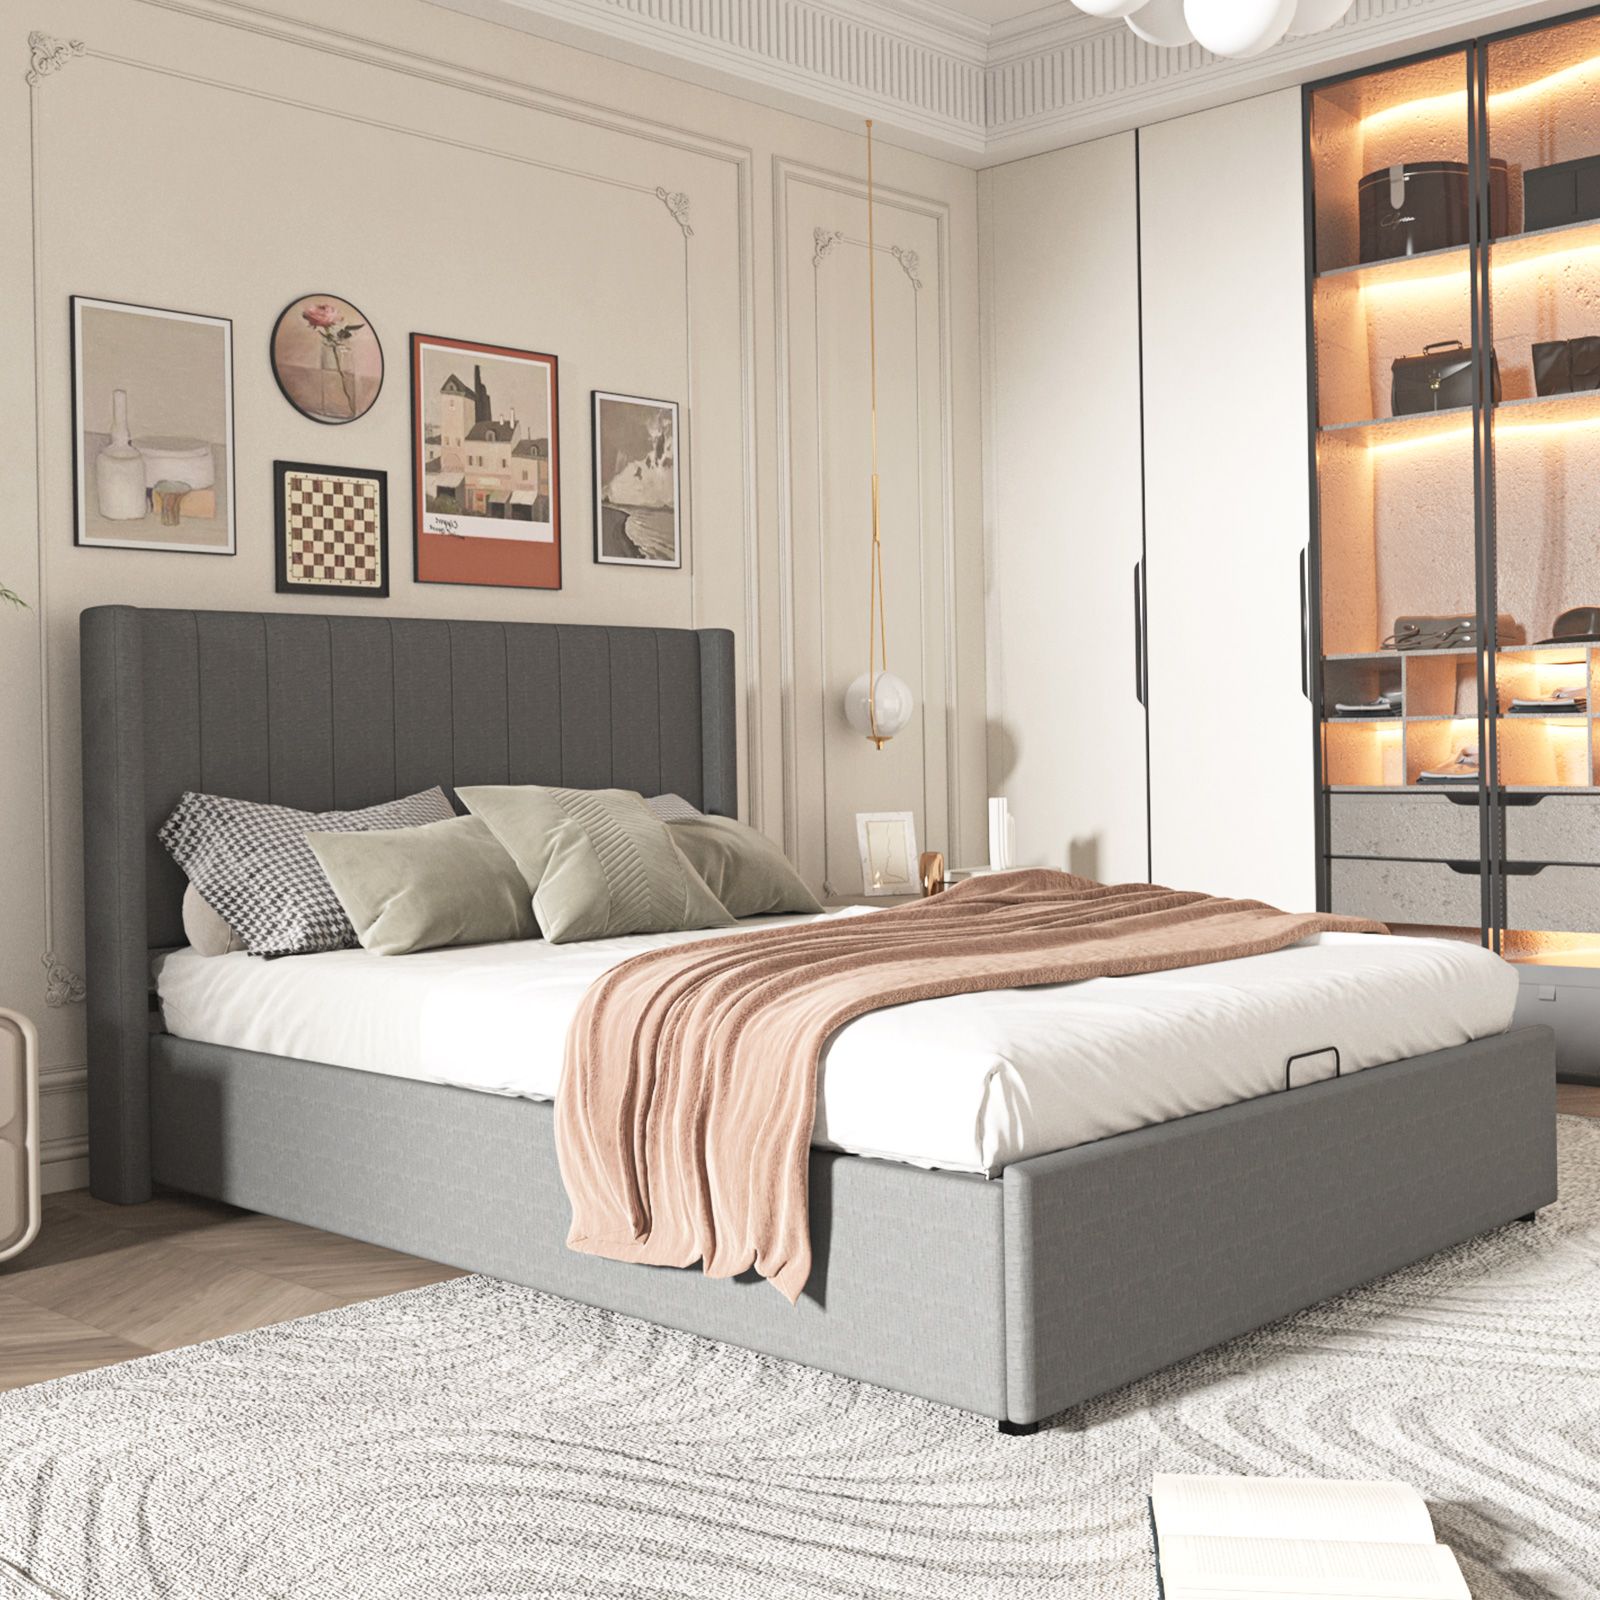 Wooden Bed Frame Queen Size Mattress Base Platform Gas Lift Up Underbed Storage Upholstered Fabric Wingback Headboard Bedroom Furniture Grey